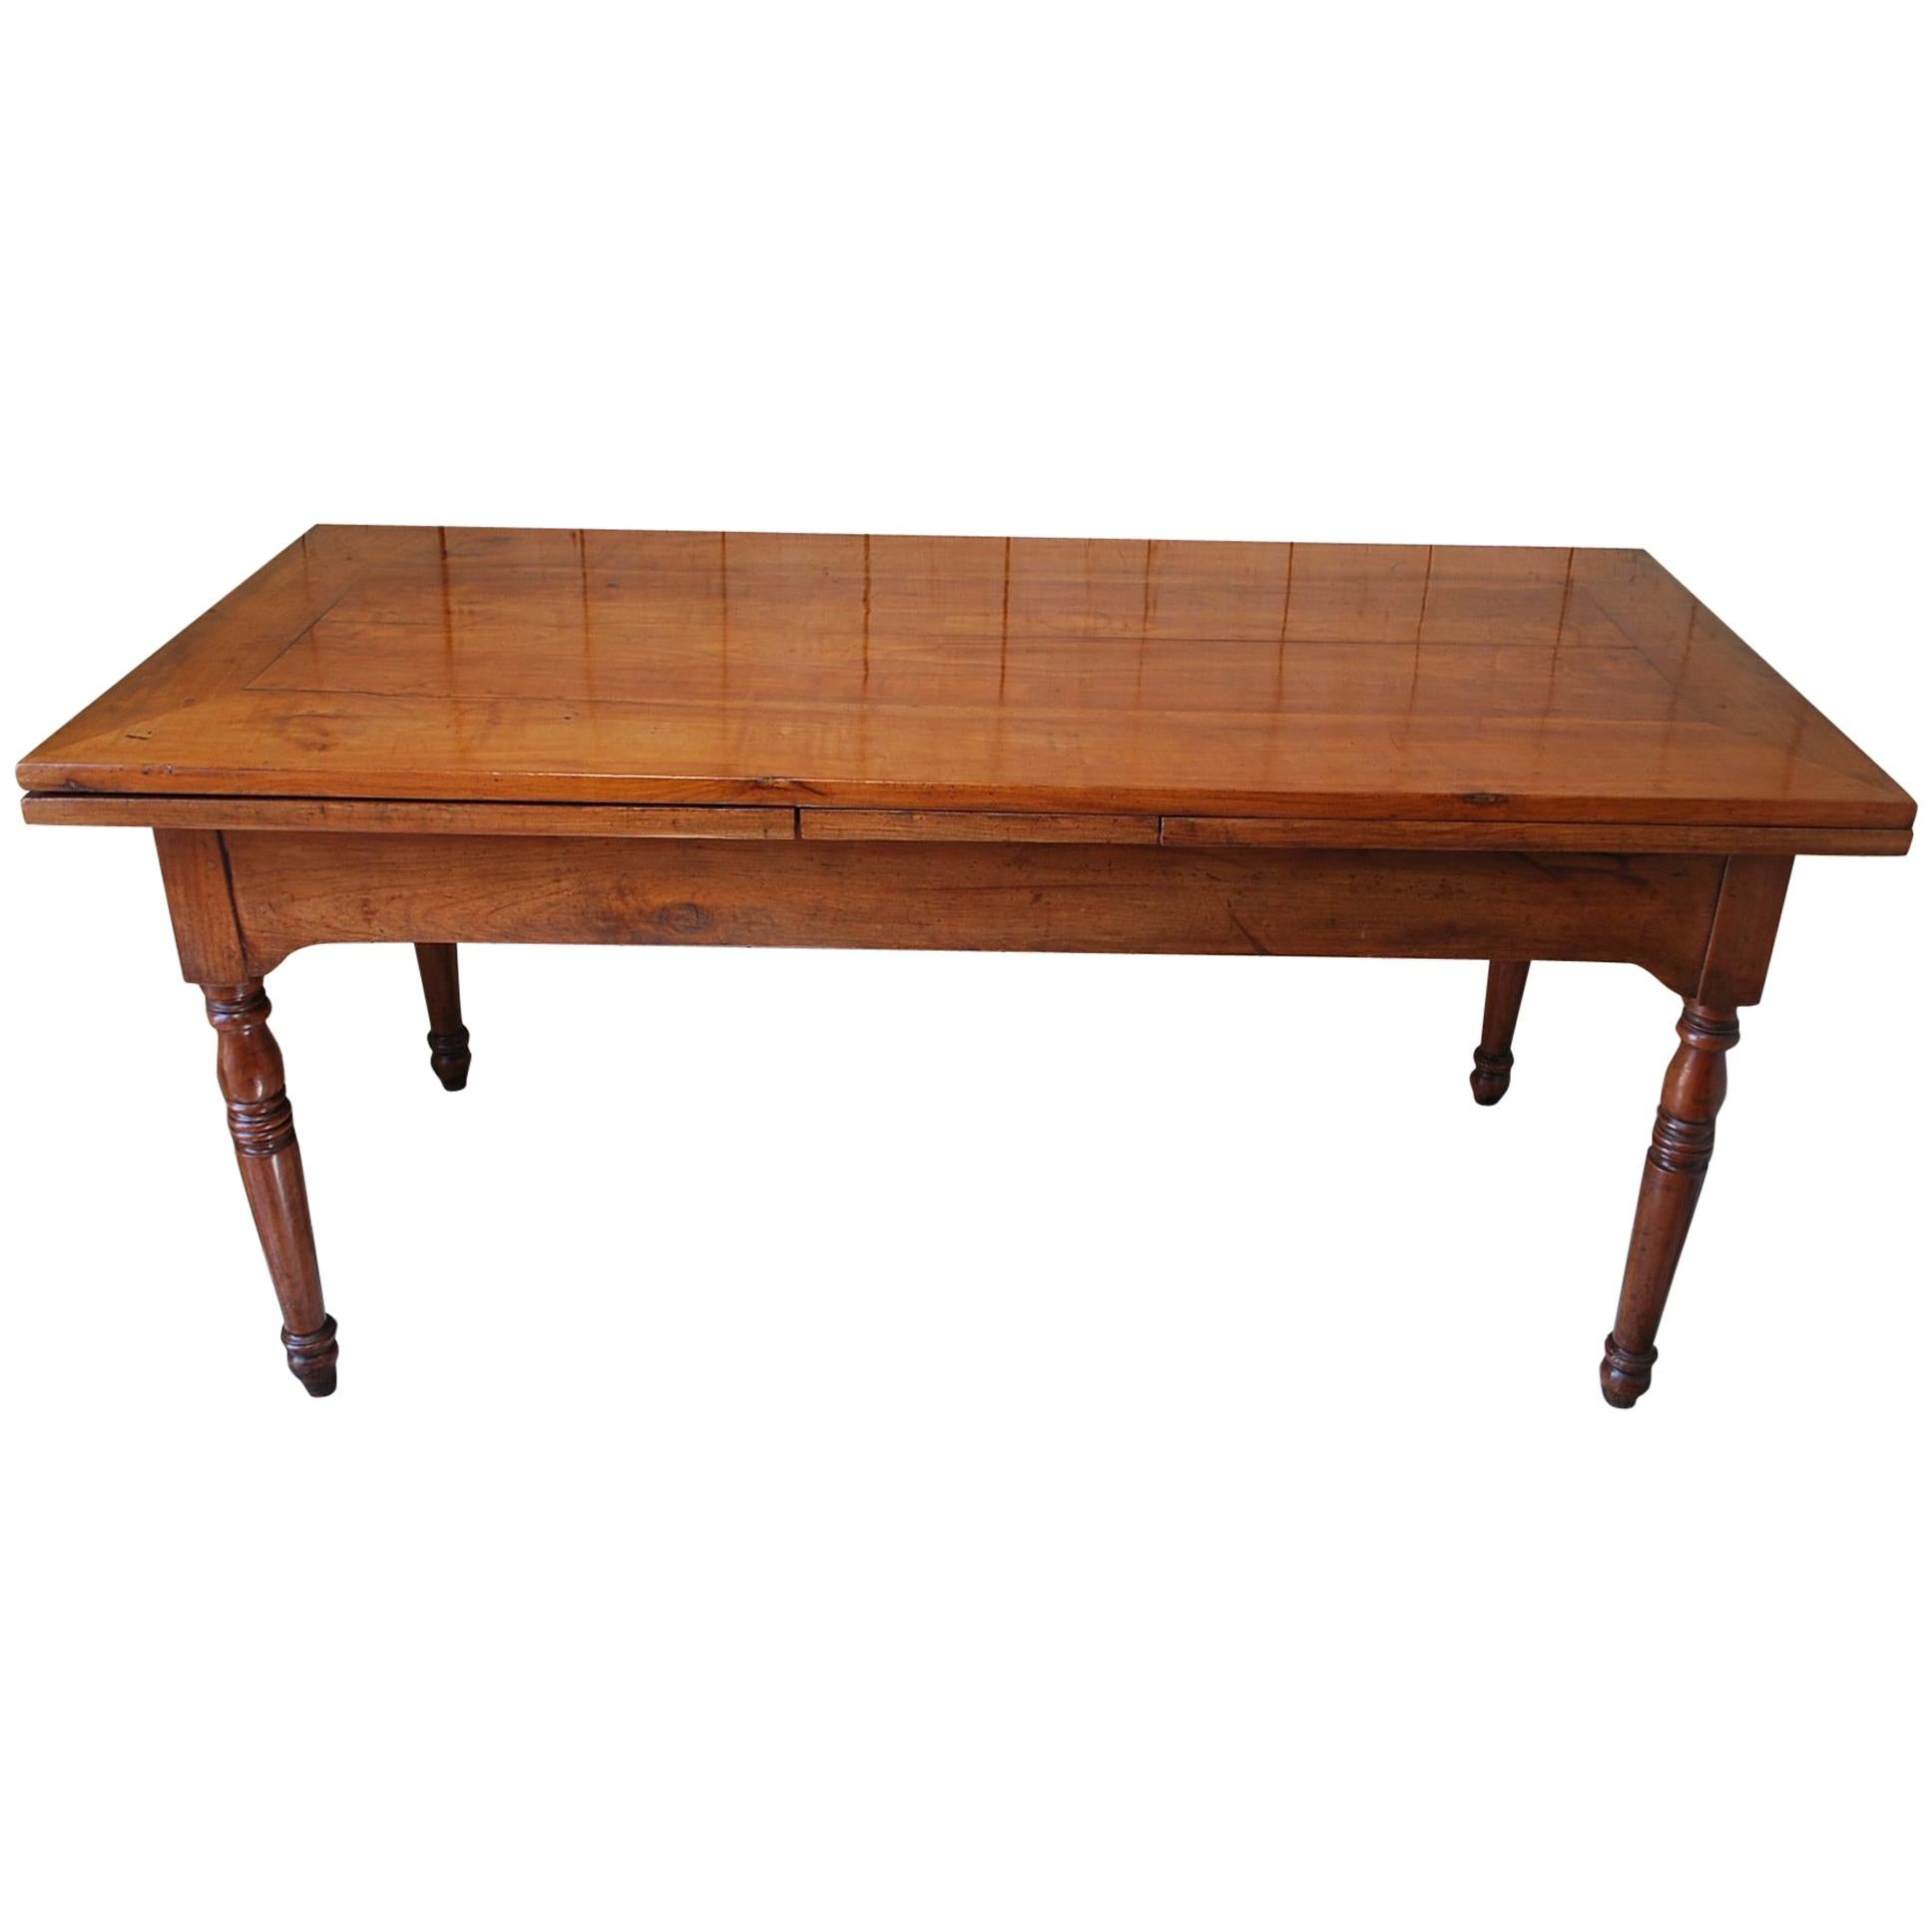 Antique Extending Cherry Wood Farmhouse Kitchen Dining Table For Sale